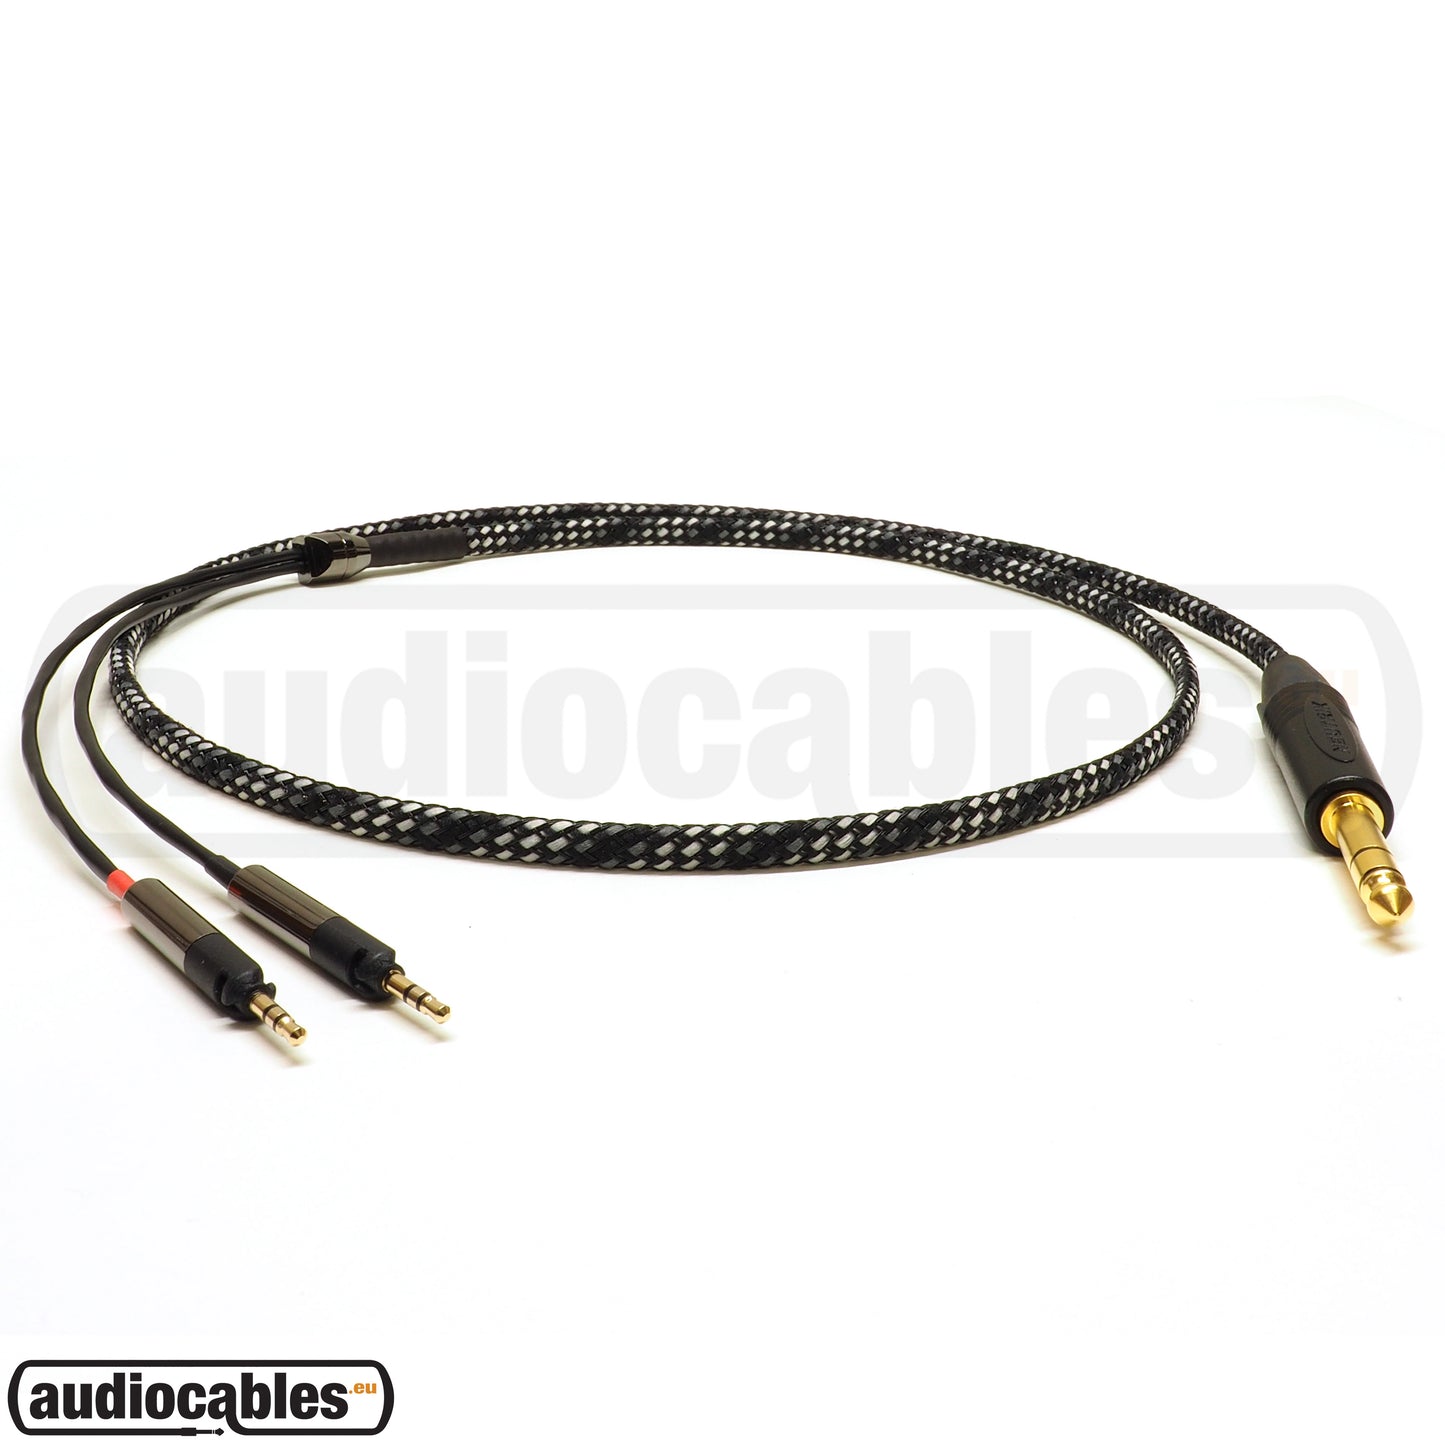 Mogami Cable for Audio Technica ATH-R70X (Braided, Single Ended, 3.5mm/6.3mm)